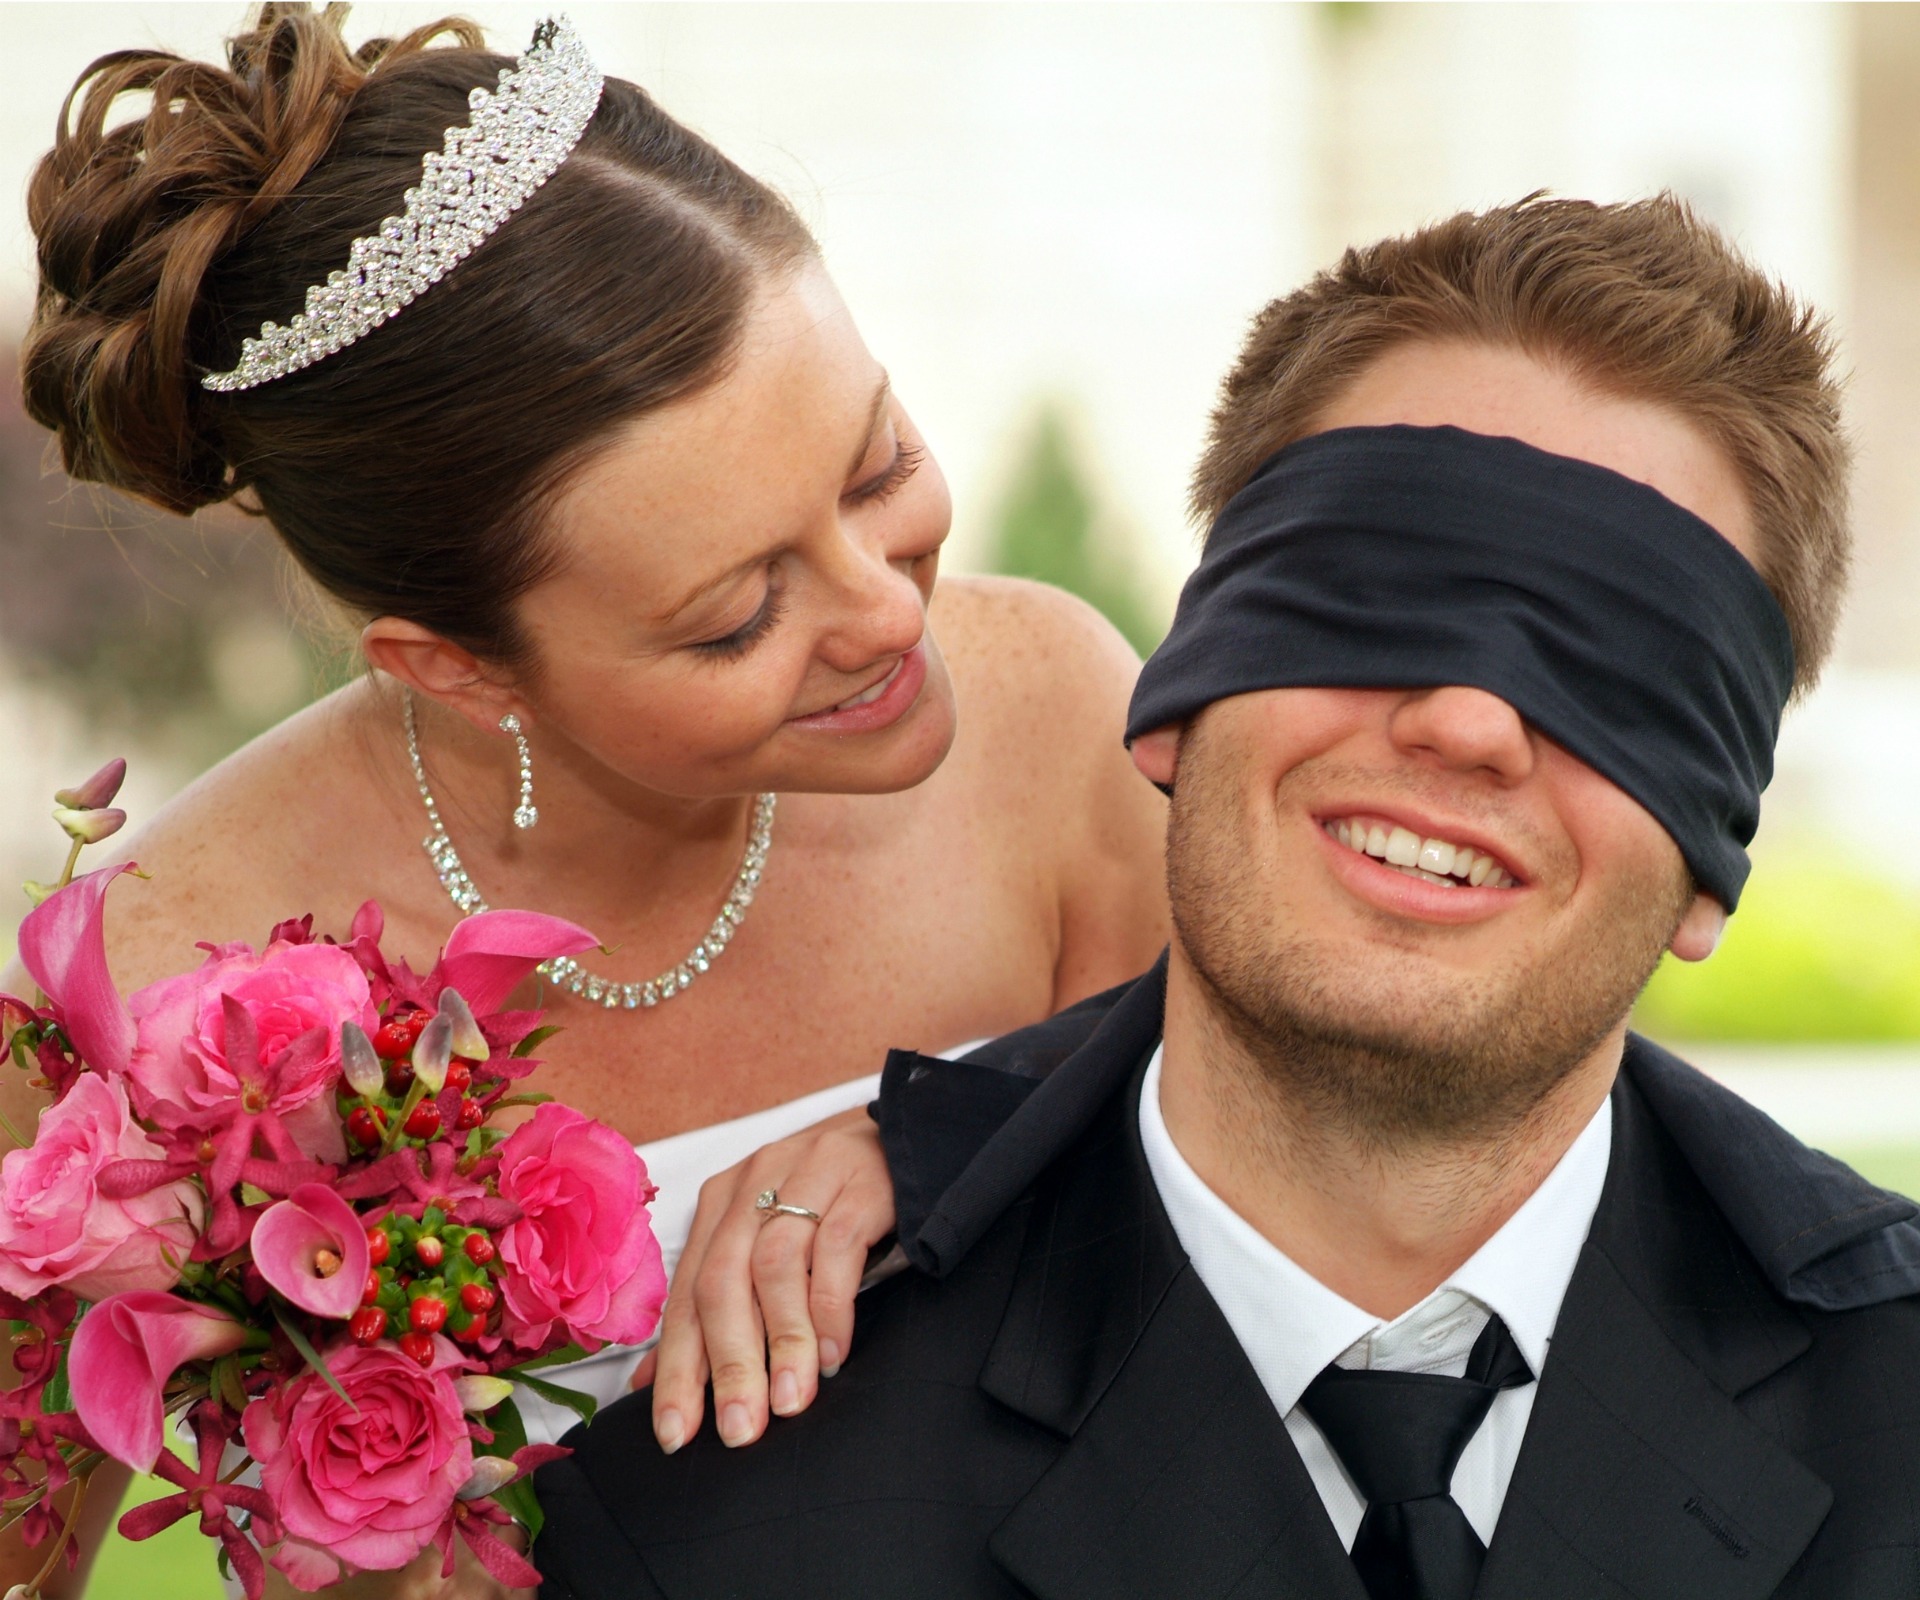 blindfolded man and wife getty images